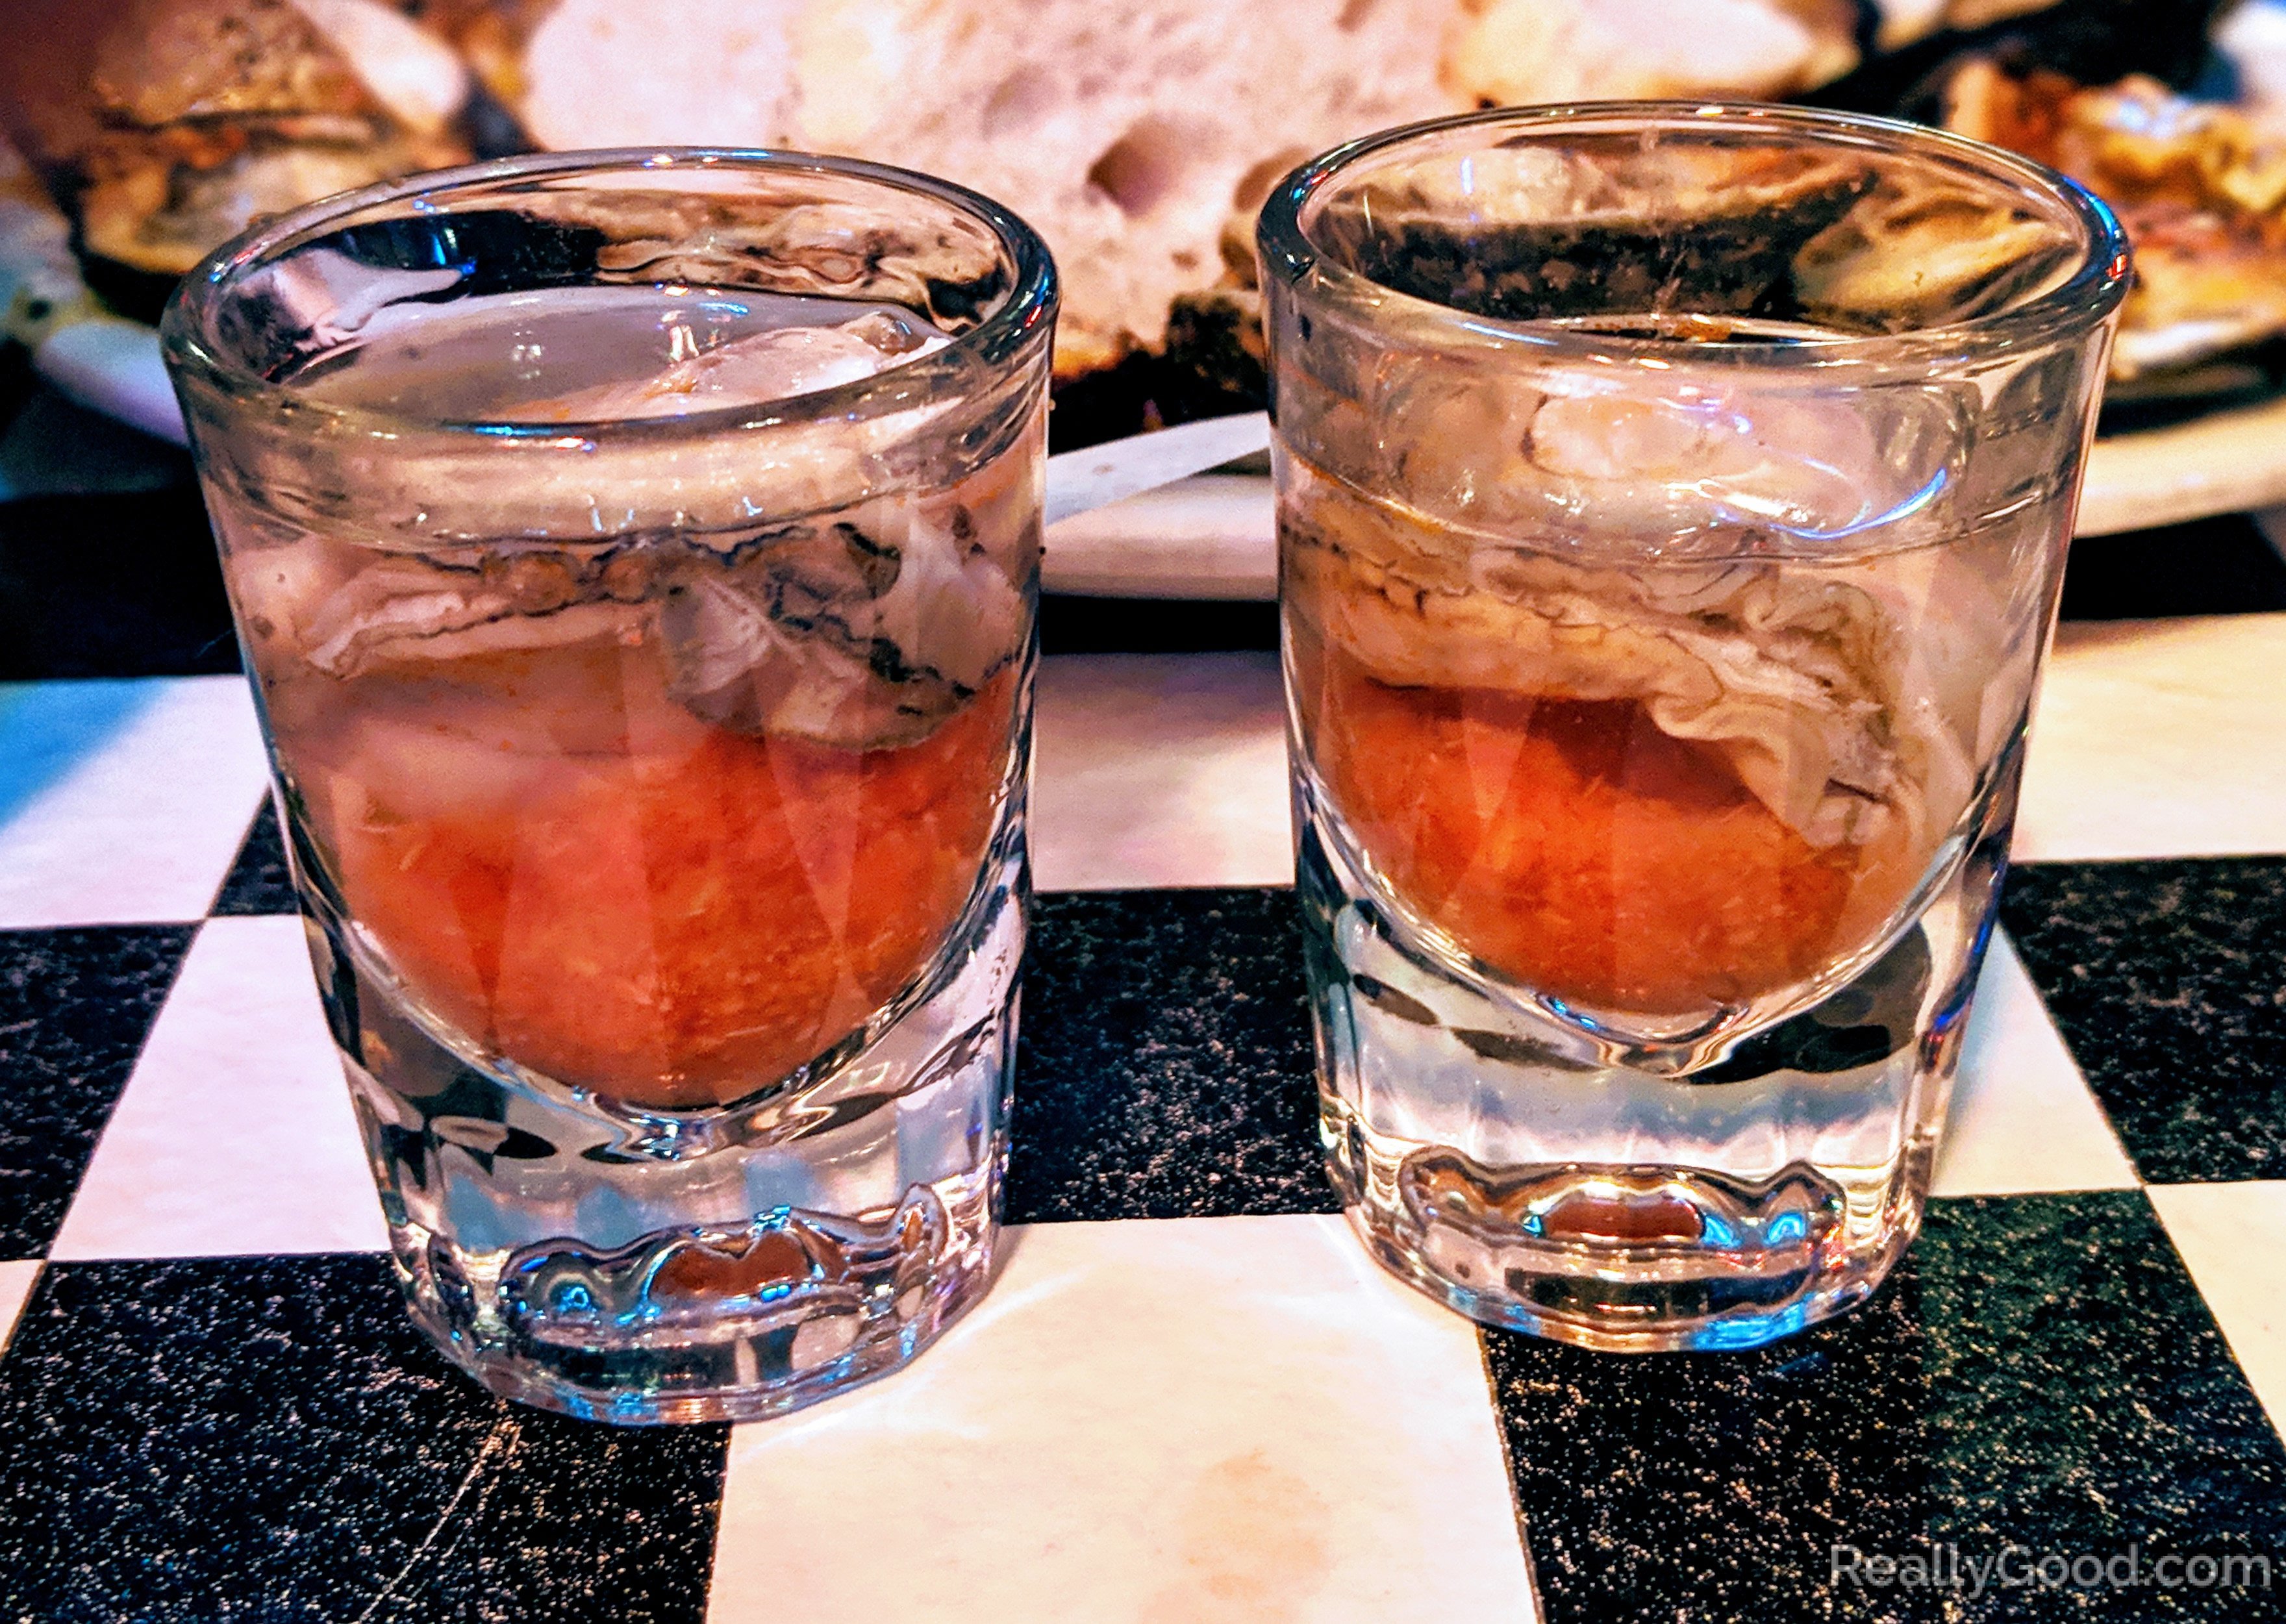 Oyster shots